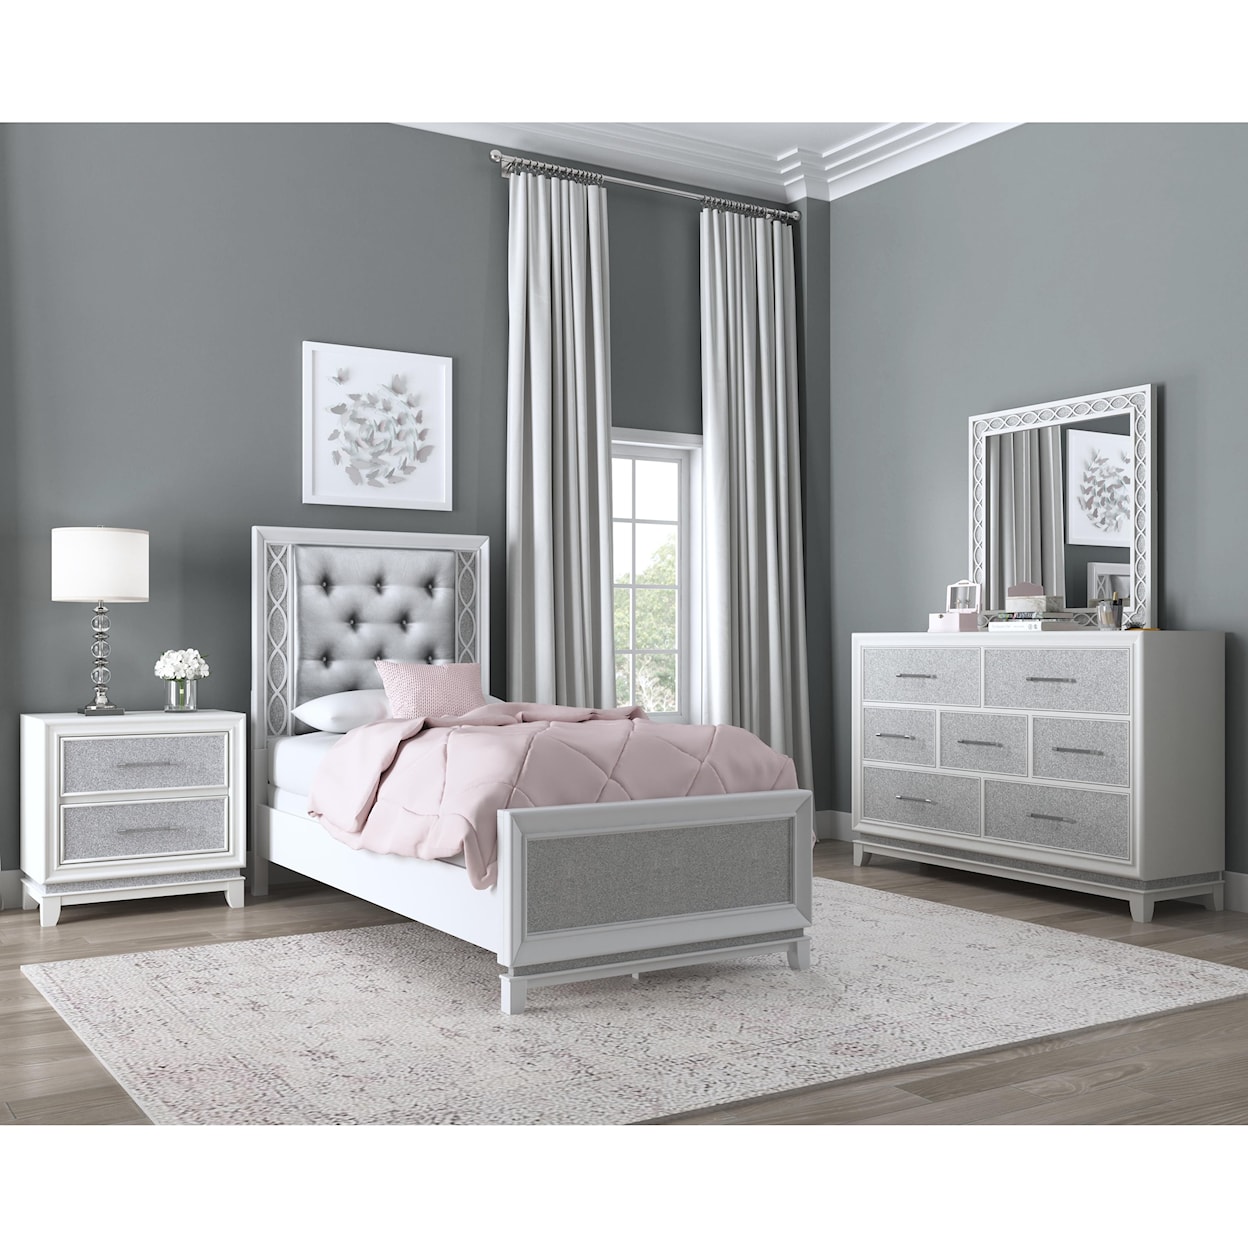 Samuel Lawrence Starlight Twin Bed